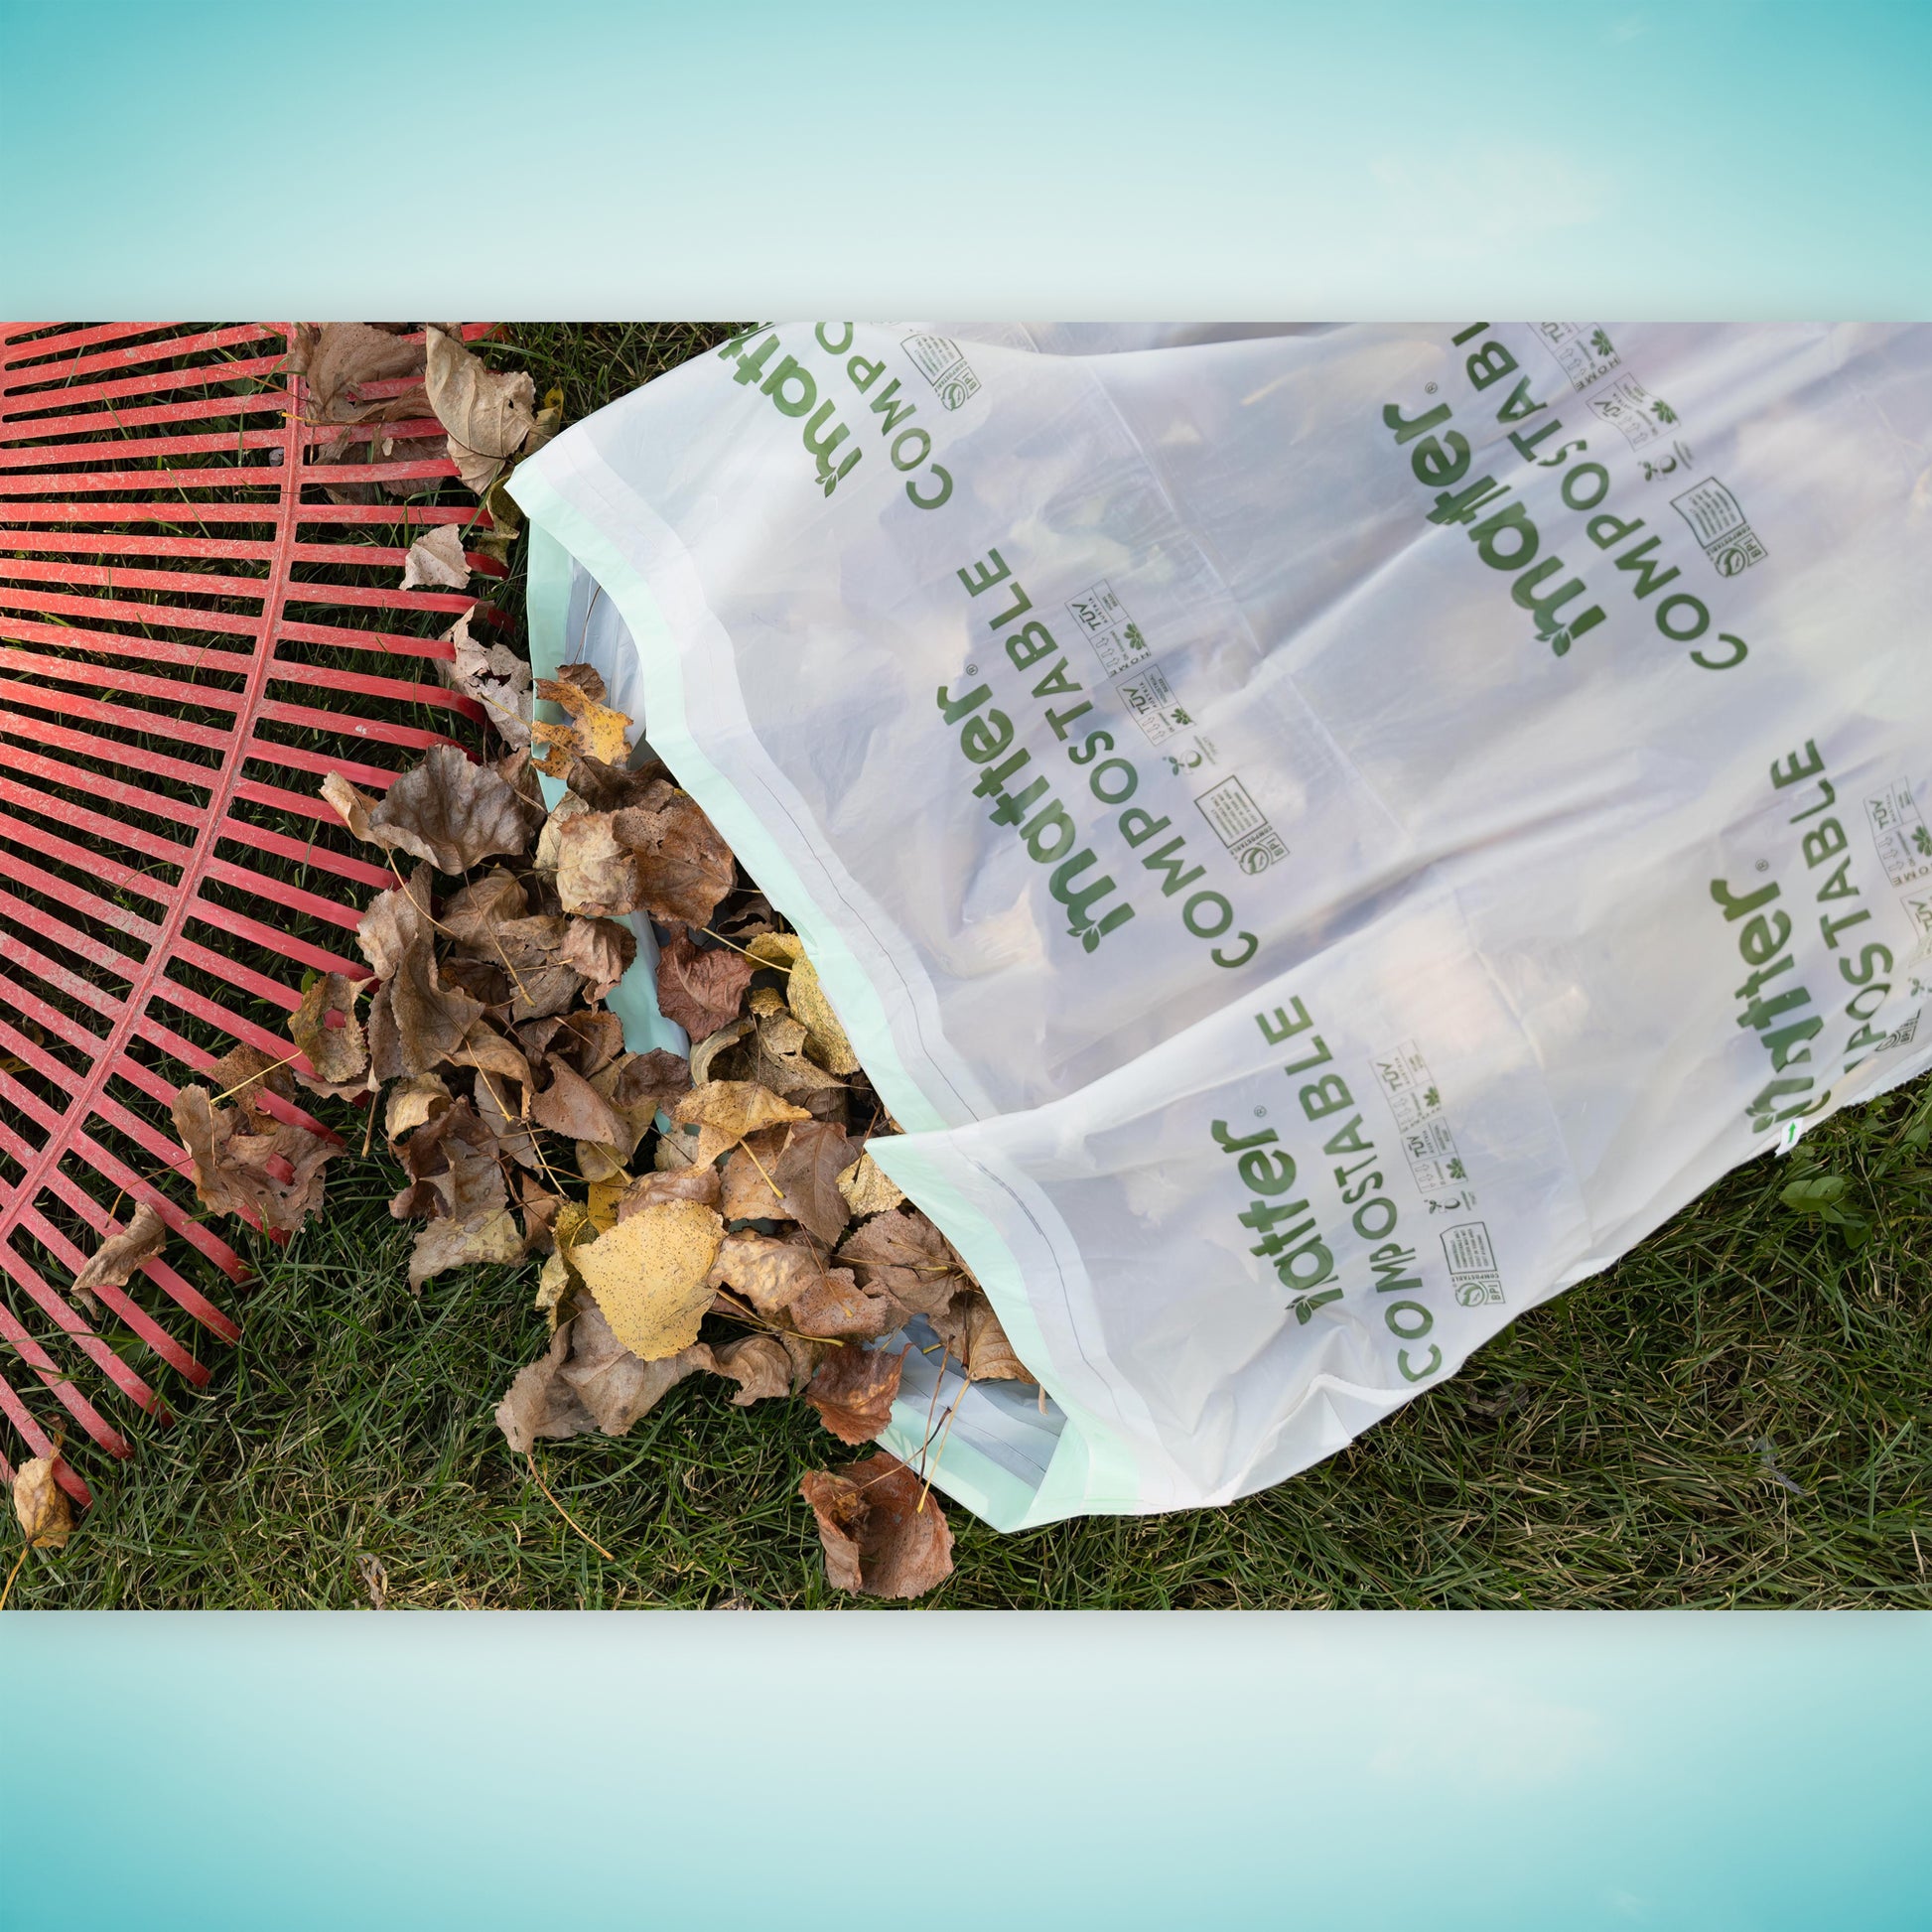 Matter Compostable Lawn And Leaf Bags - 33 Gallon/10ct : Target